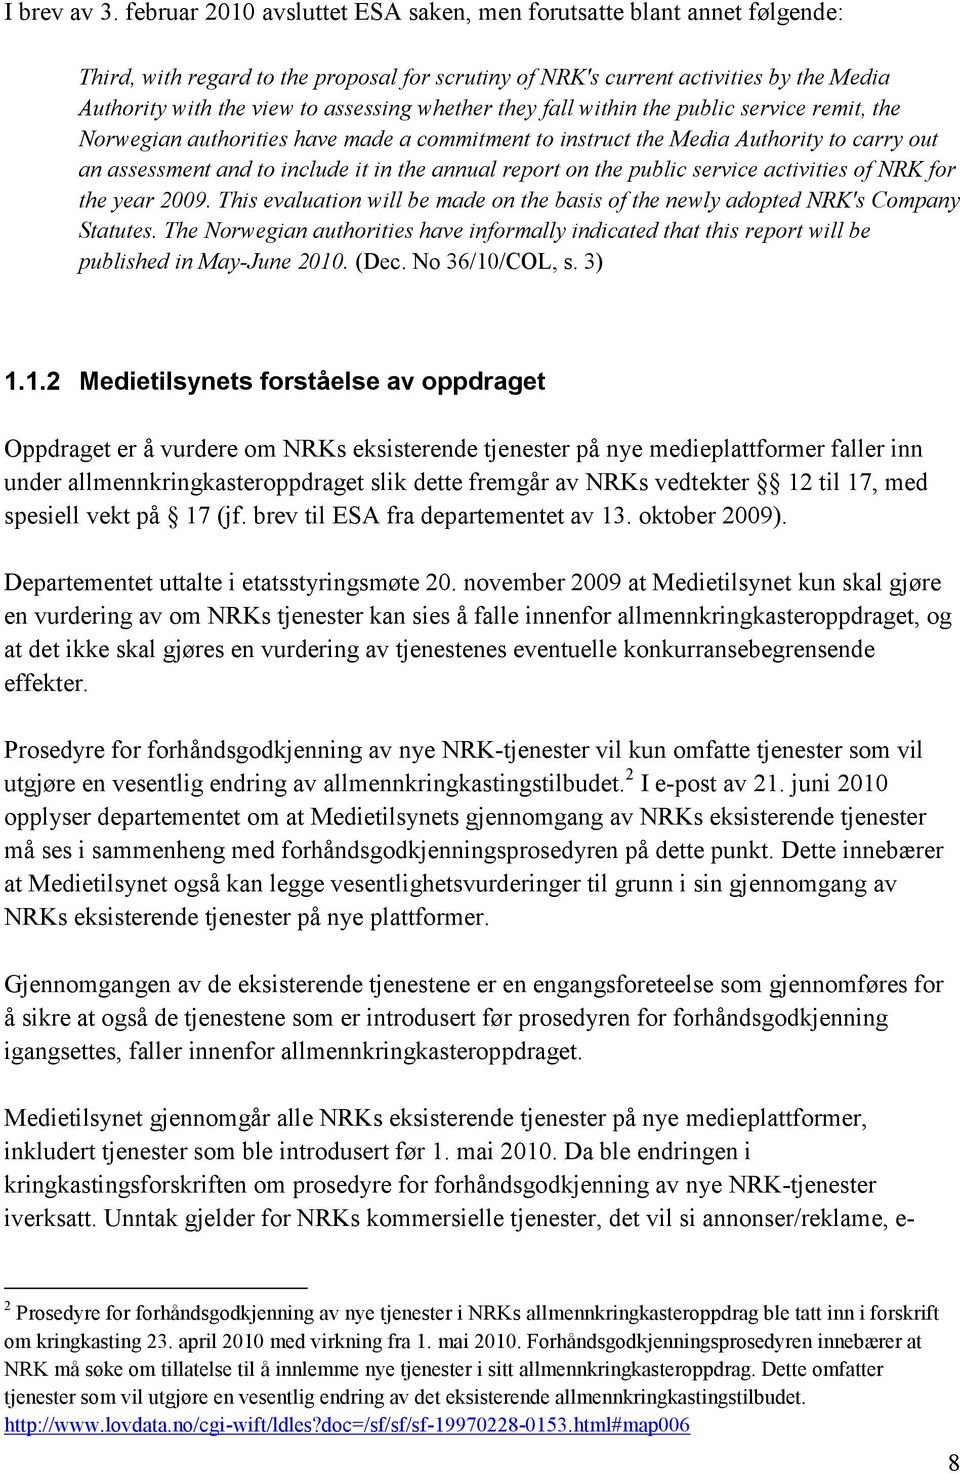 whether they fall within the public service remit, the Norwegian authorities have made a commitment to instruct the Media Authority to carry out an assessment and to include it in the annual report